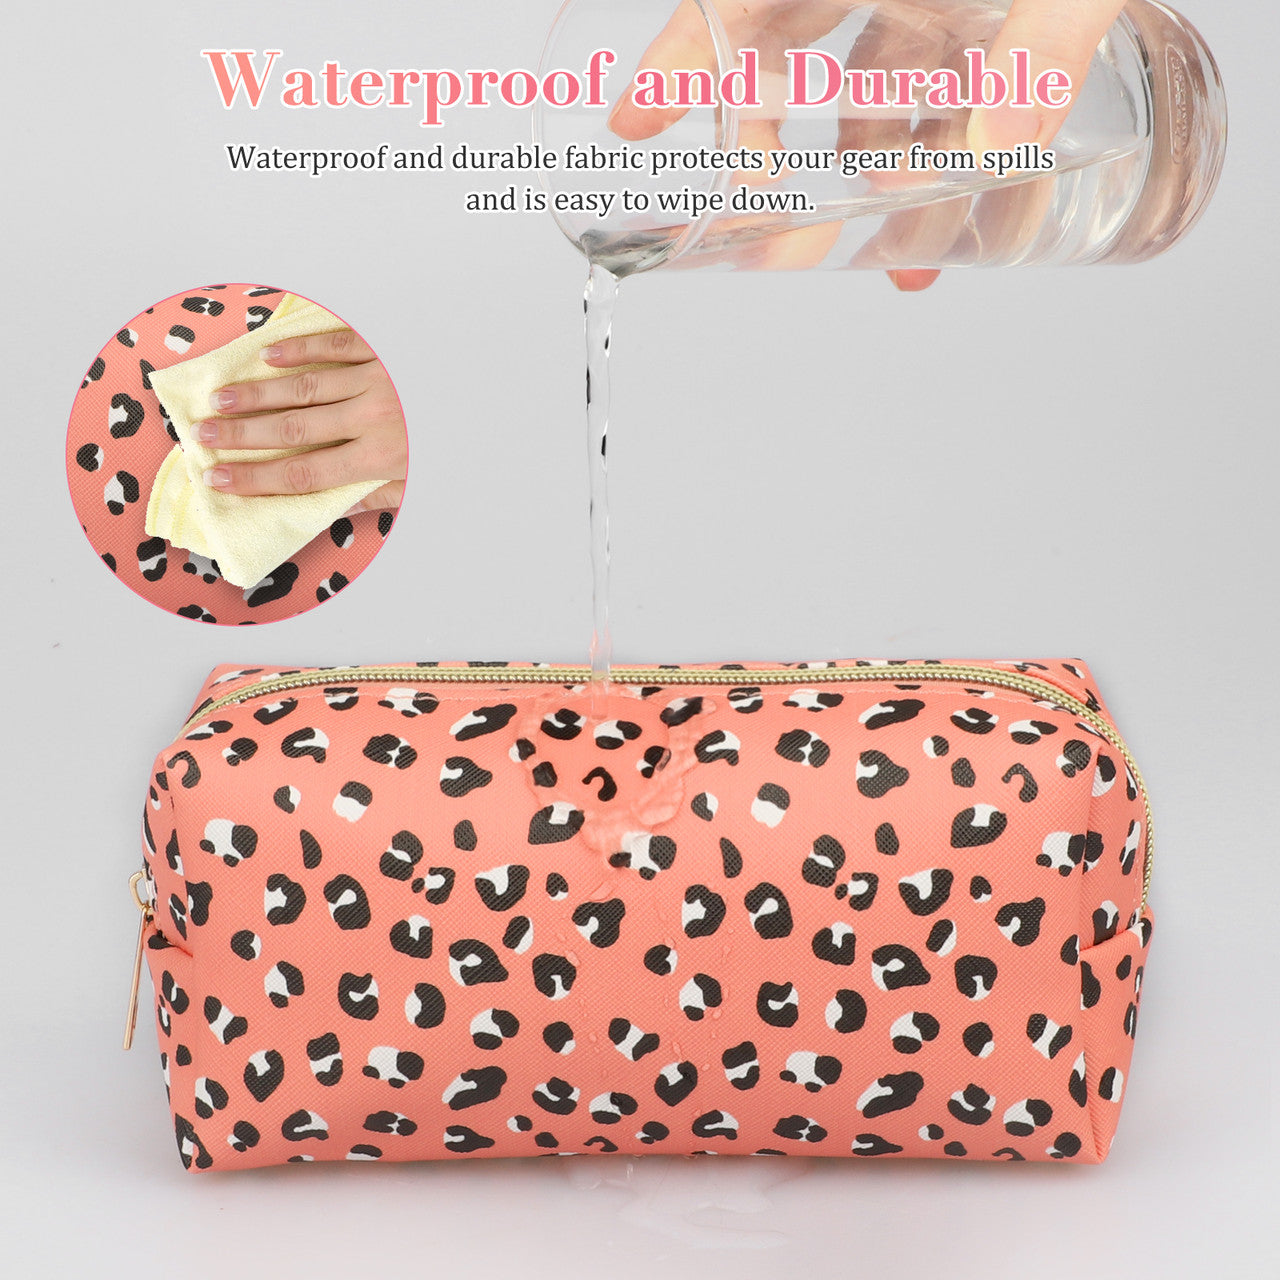 Leopard Print Travel Waterproof Cosmetic Bag with a Large Capacity to Hiold all your Cosmetics